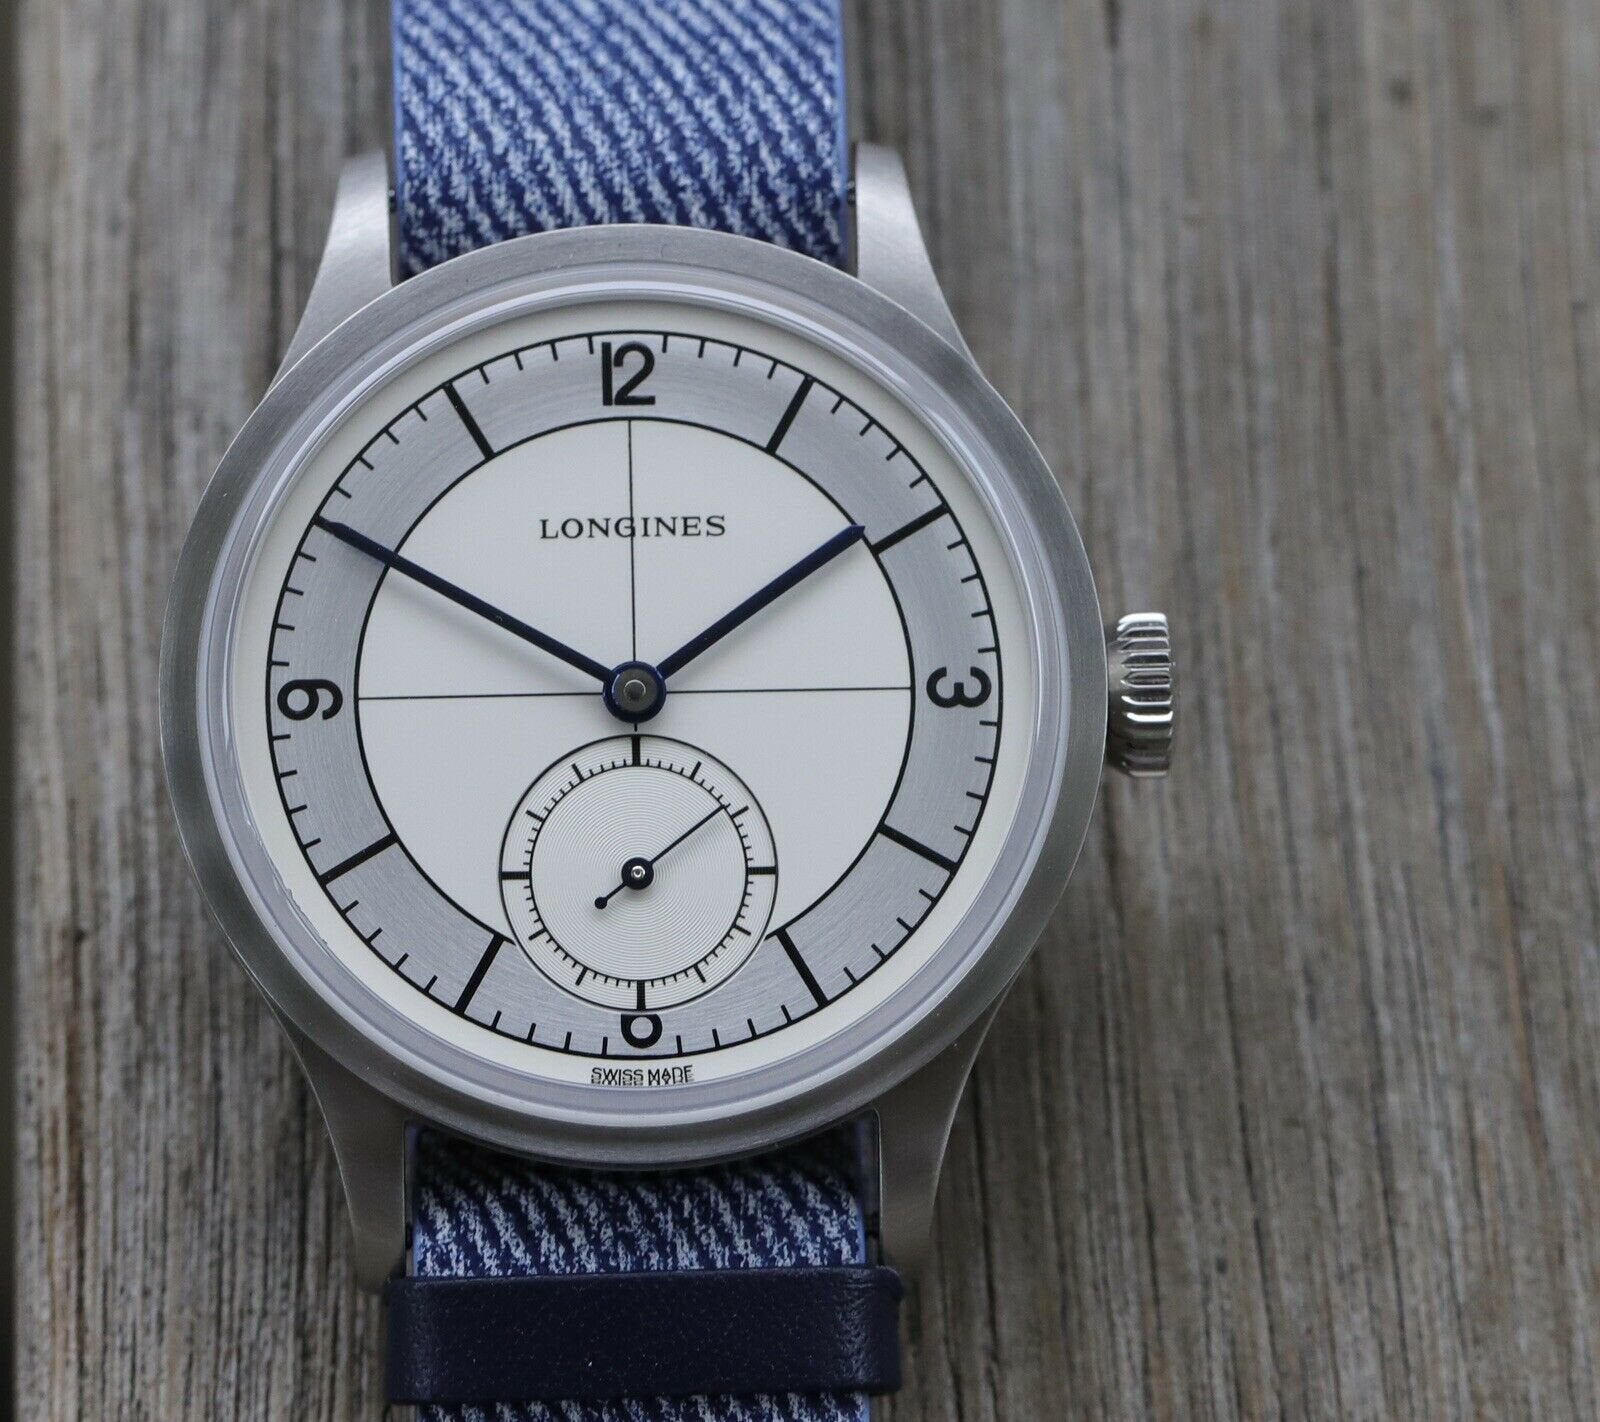 Longines_Heritage_Classic_Sector_Dial_L2.828.4.73.0_28284730_-_2020_Watch_Vault_01.jpg